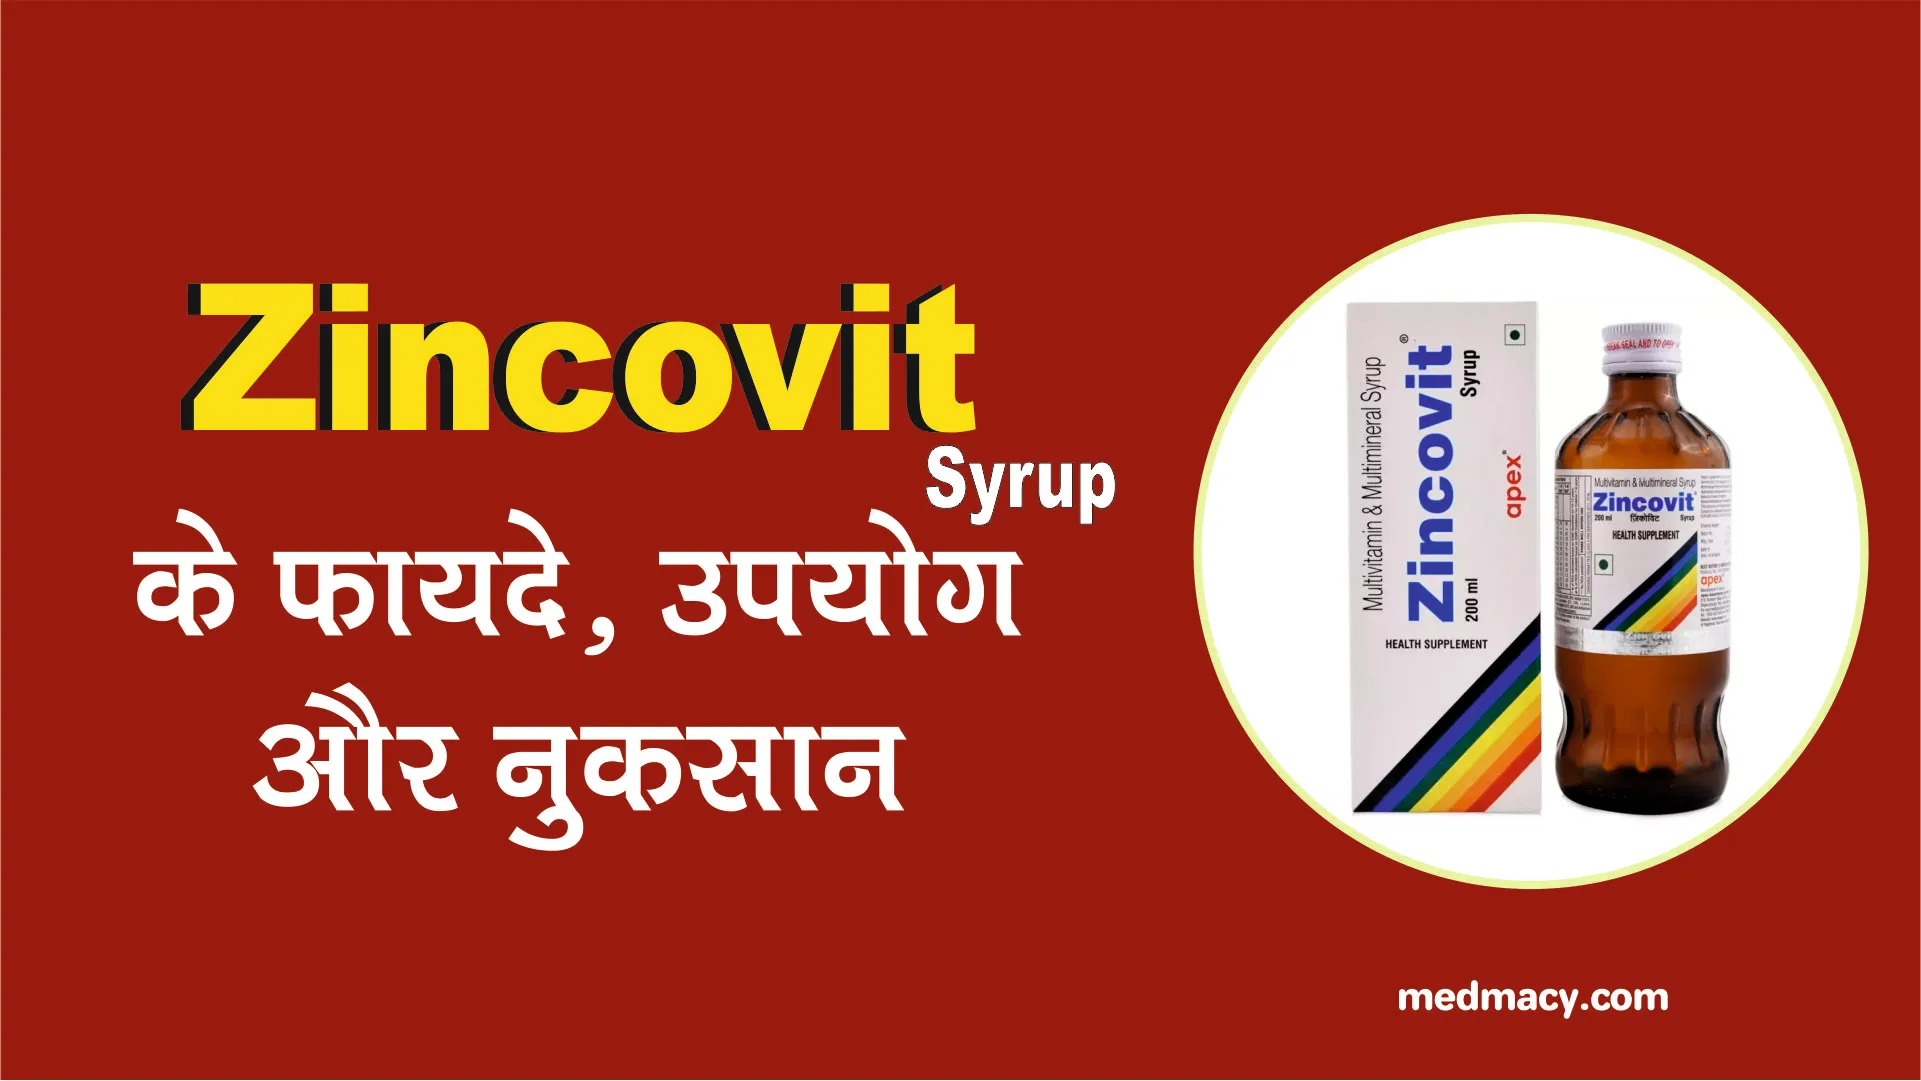 Zincovit Syrup Uses in Hindi